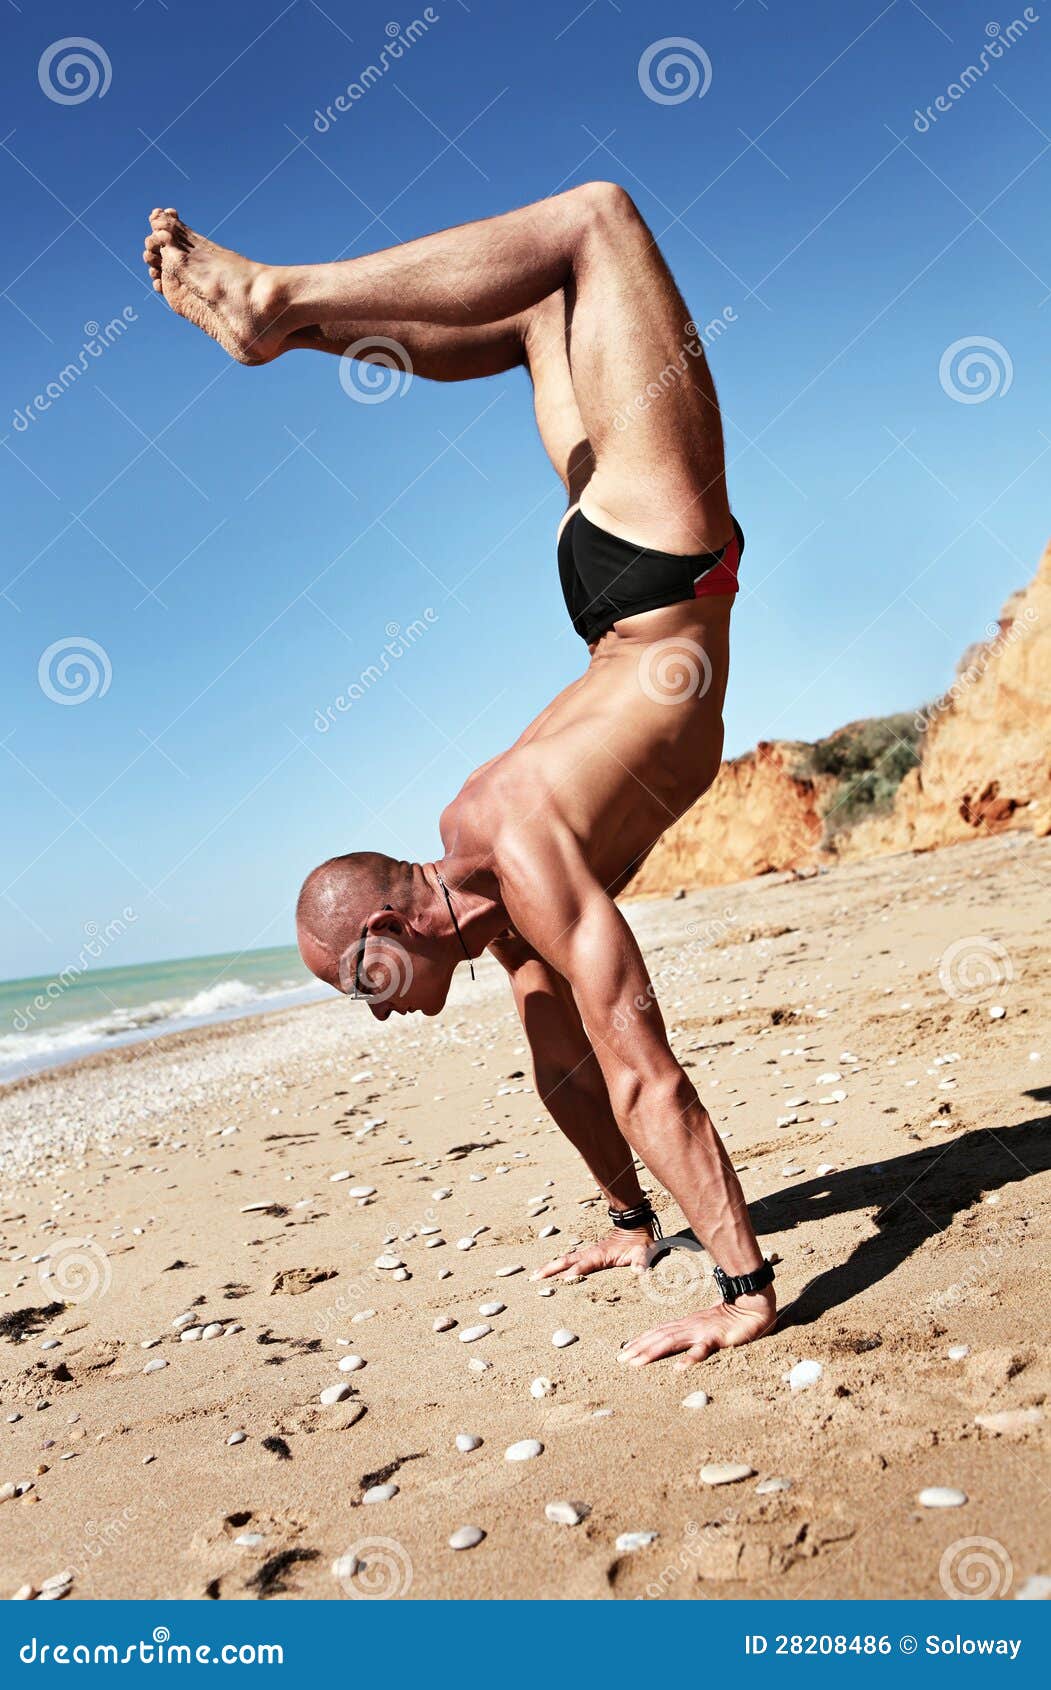 Naked Handstand Stock Photos, Pictures & Royalty-Free 